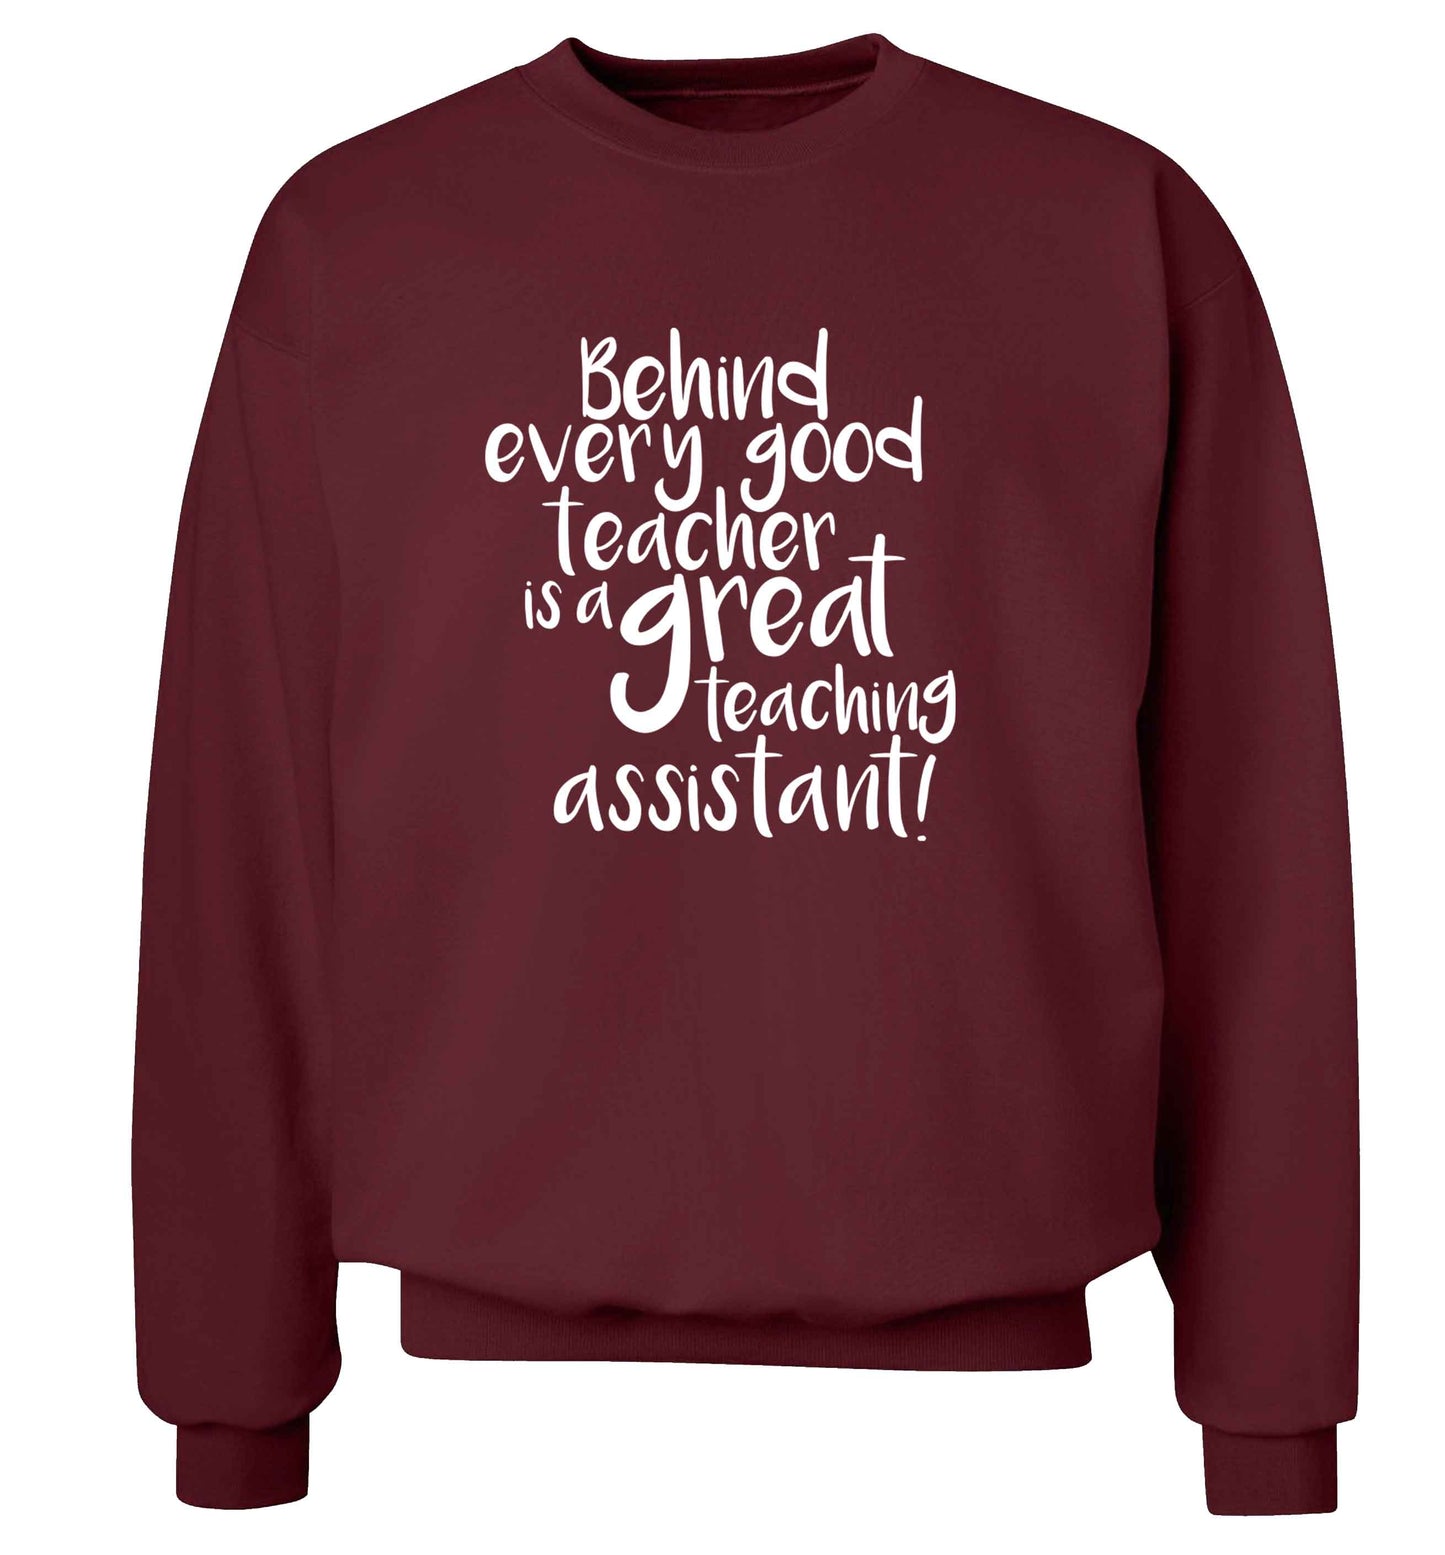 Behind every good teacher is a great teaching assistant adult's unisex maroon sweater 2XL